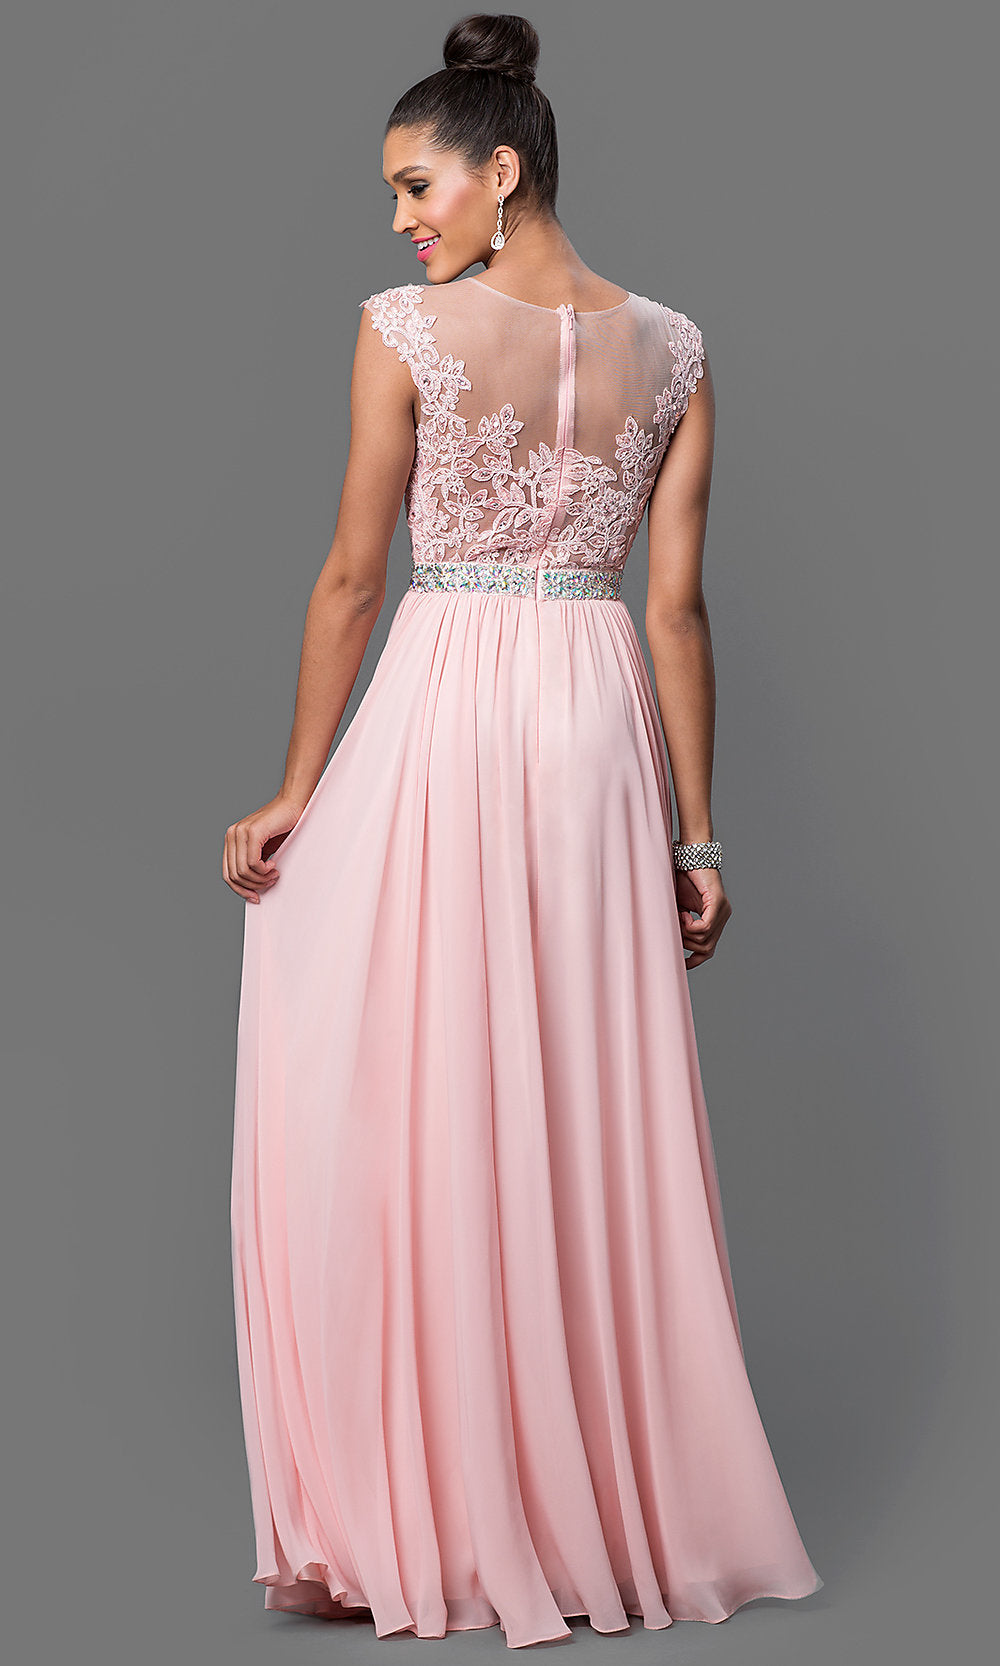  Long Formal Prom Gown with Cap Sleeves